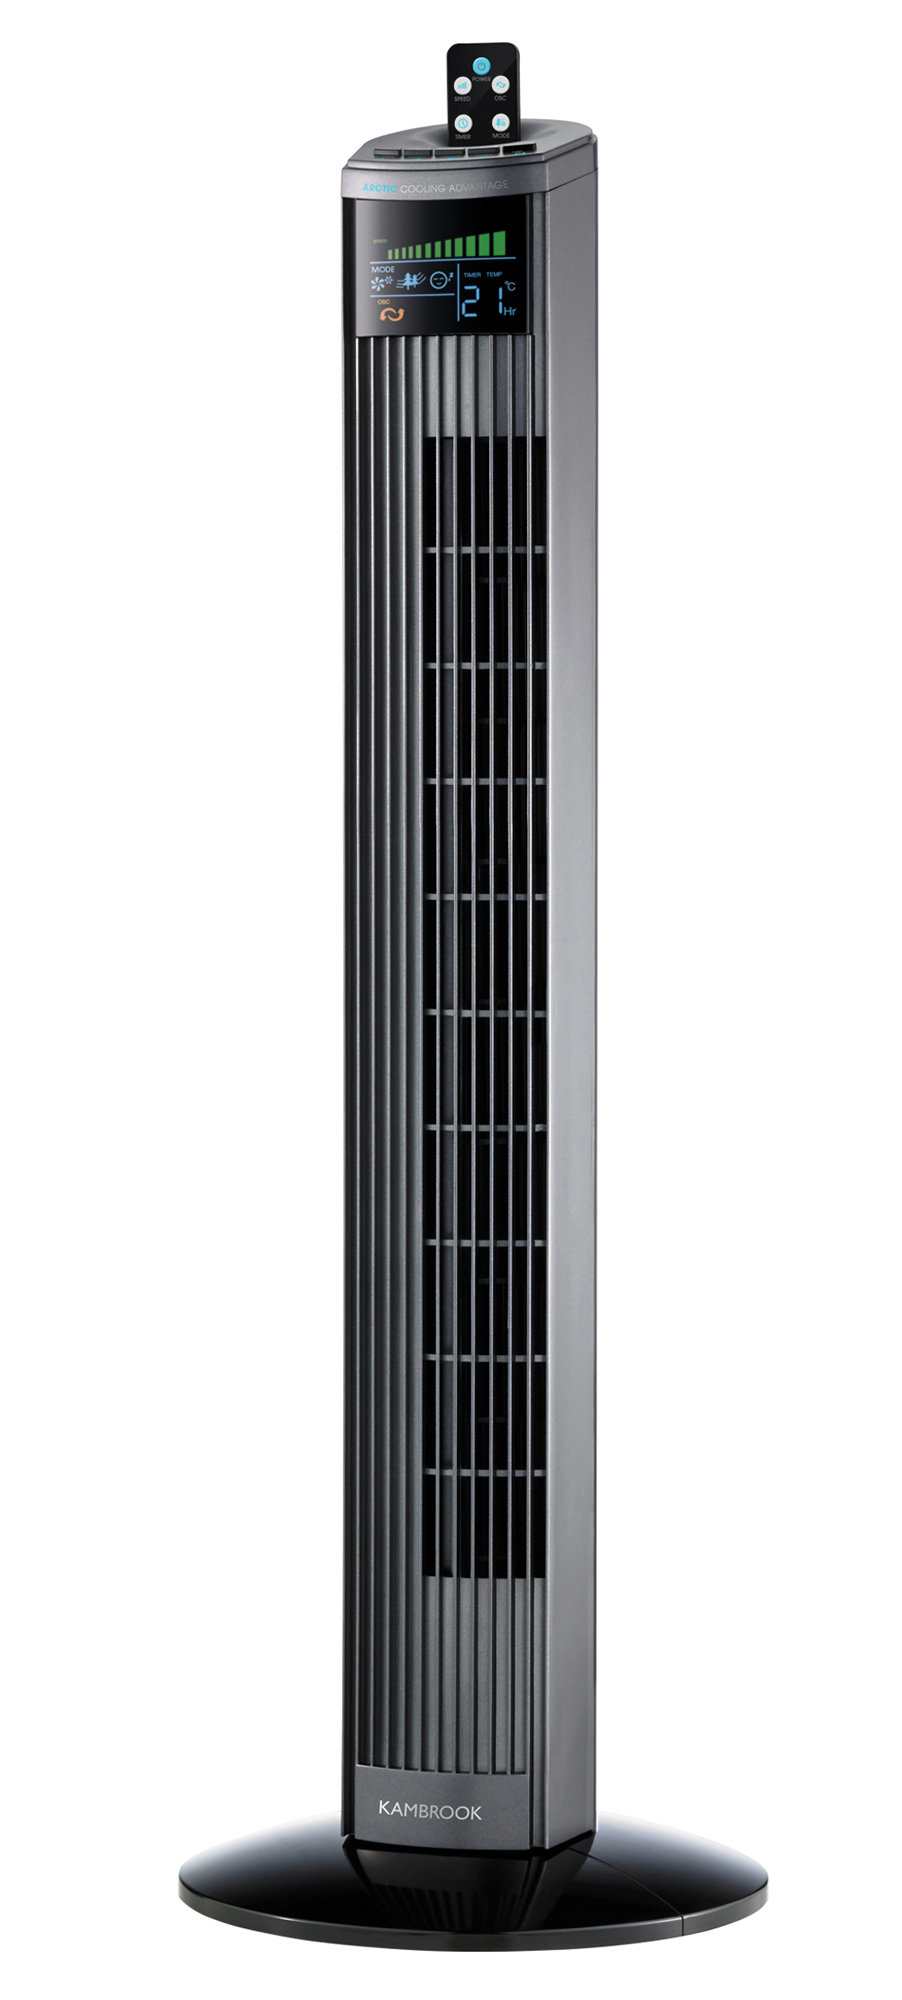 Details About New Kambrook Tower Fan Kfa837gry for proportions 902 X 2000